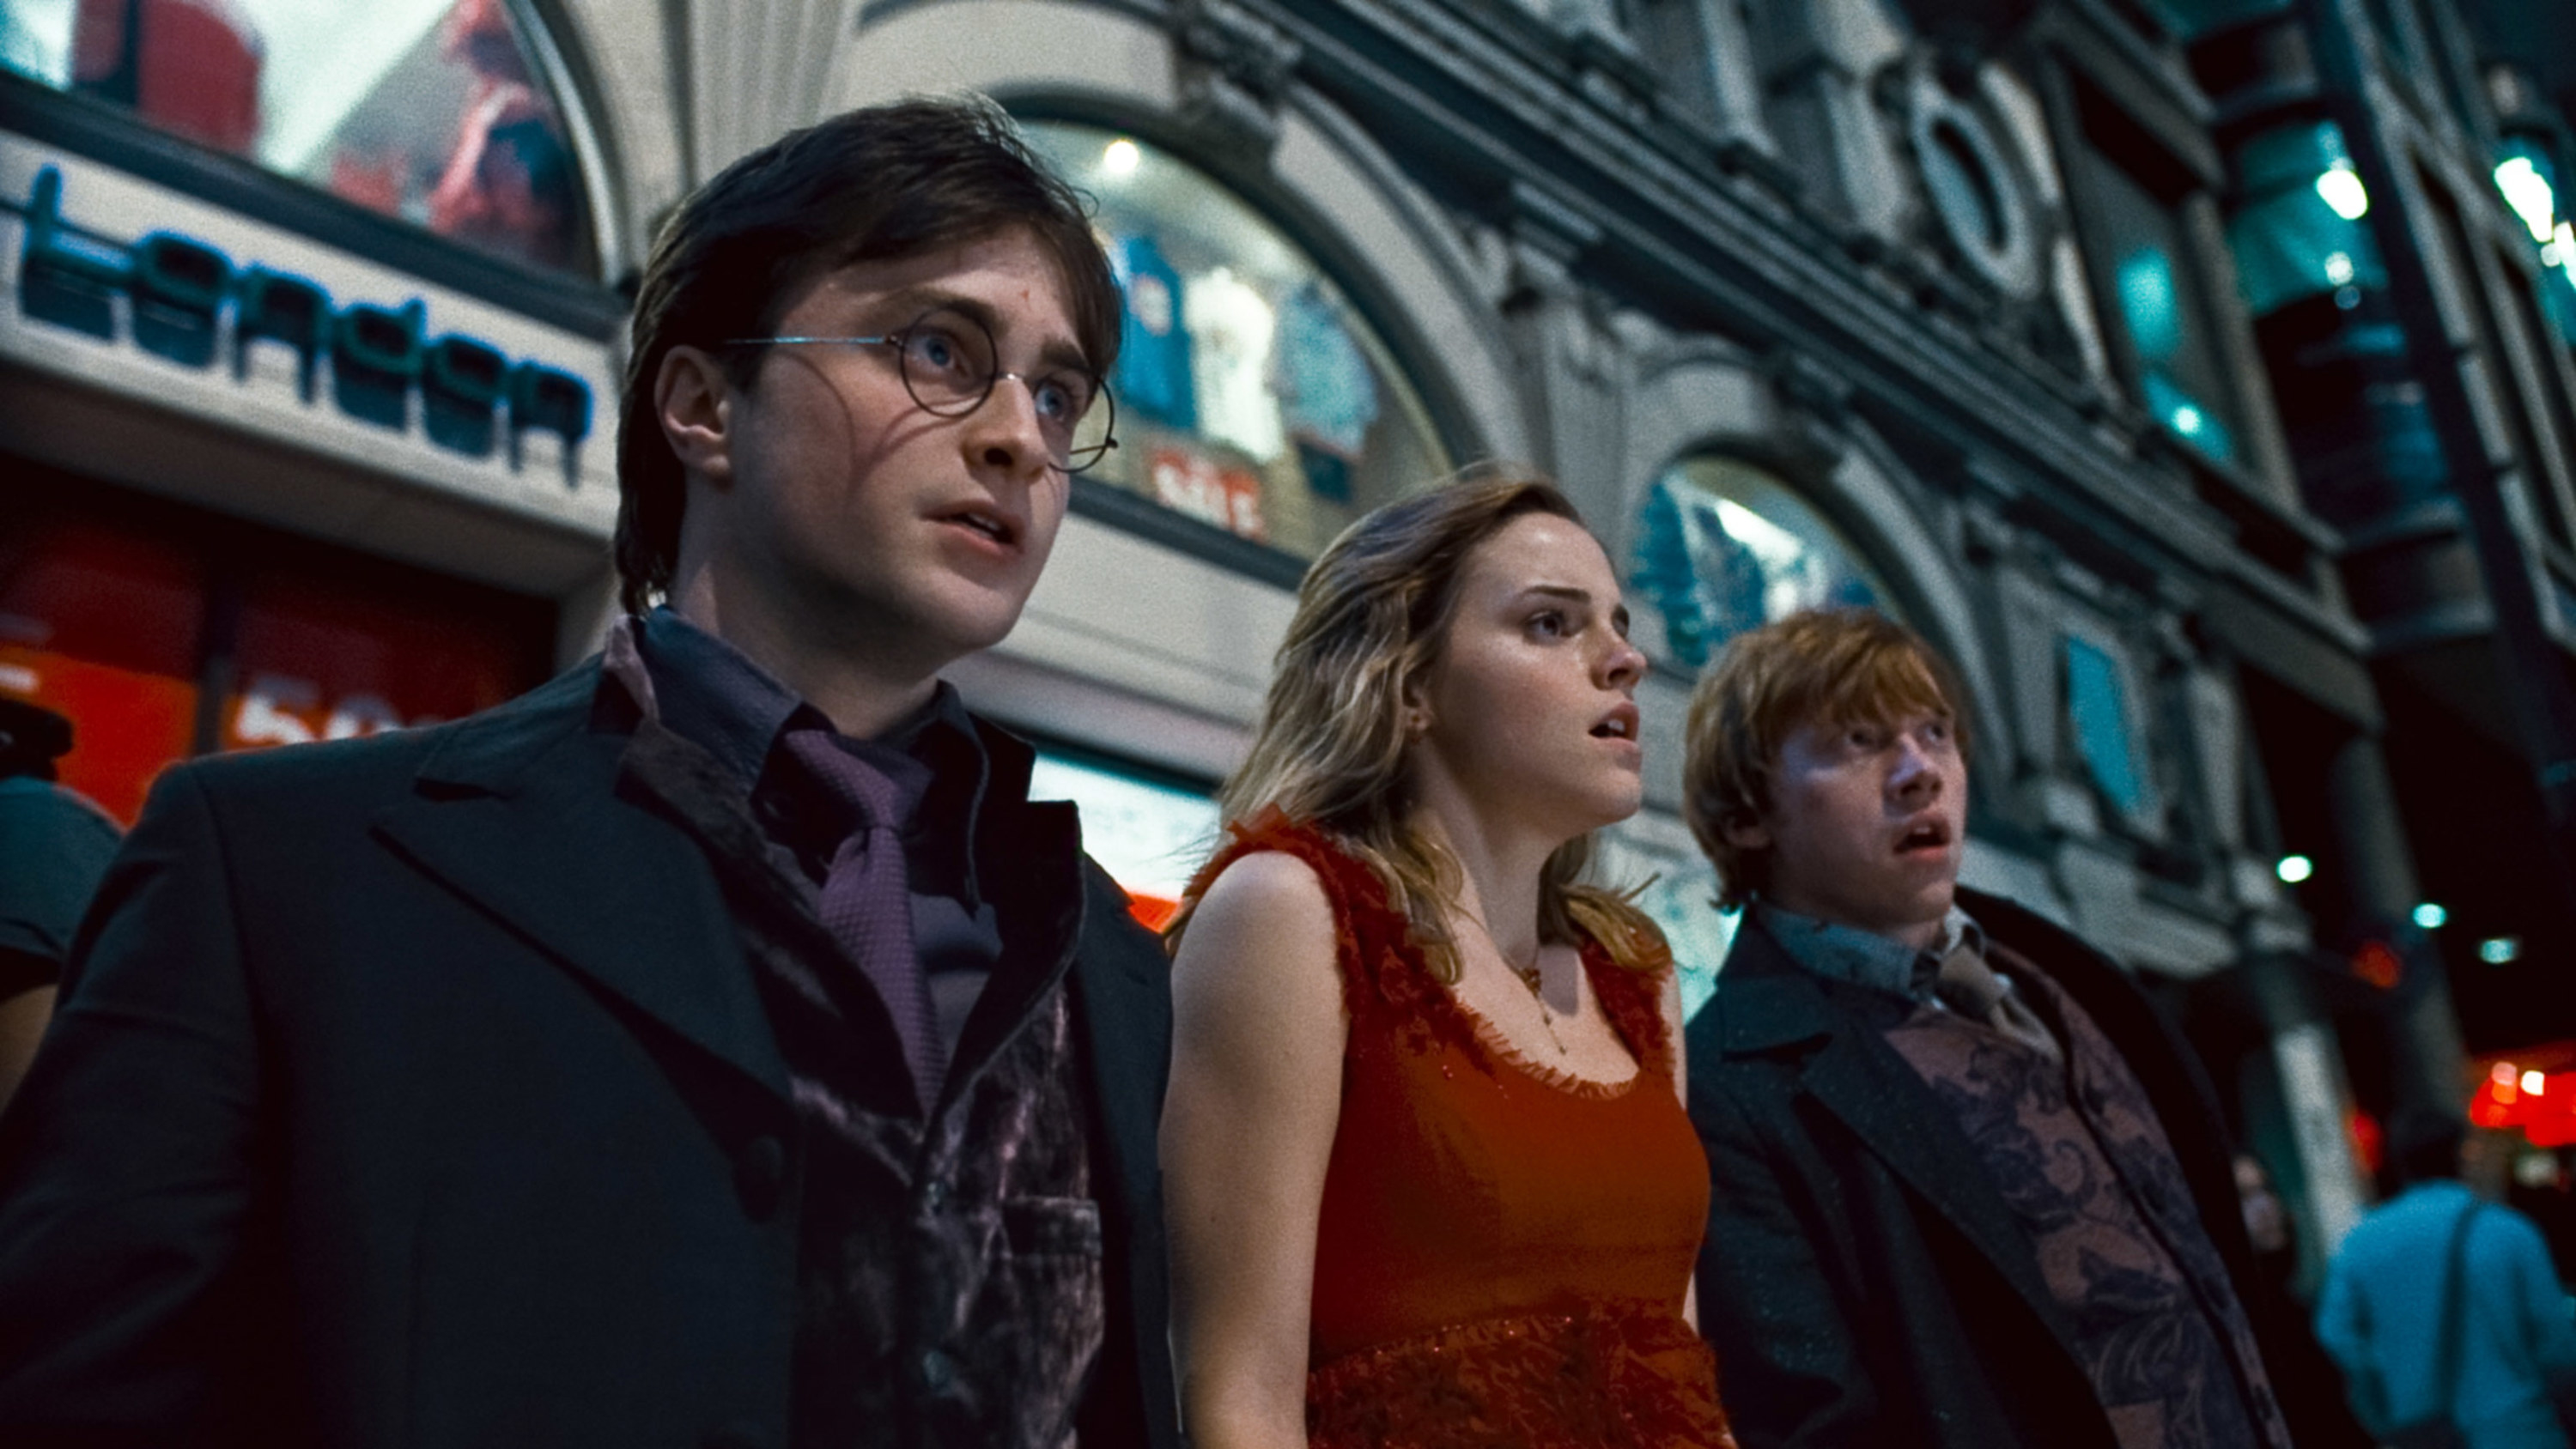 Harry, Hermione, and Ron on the run in London